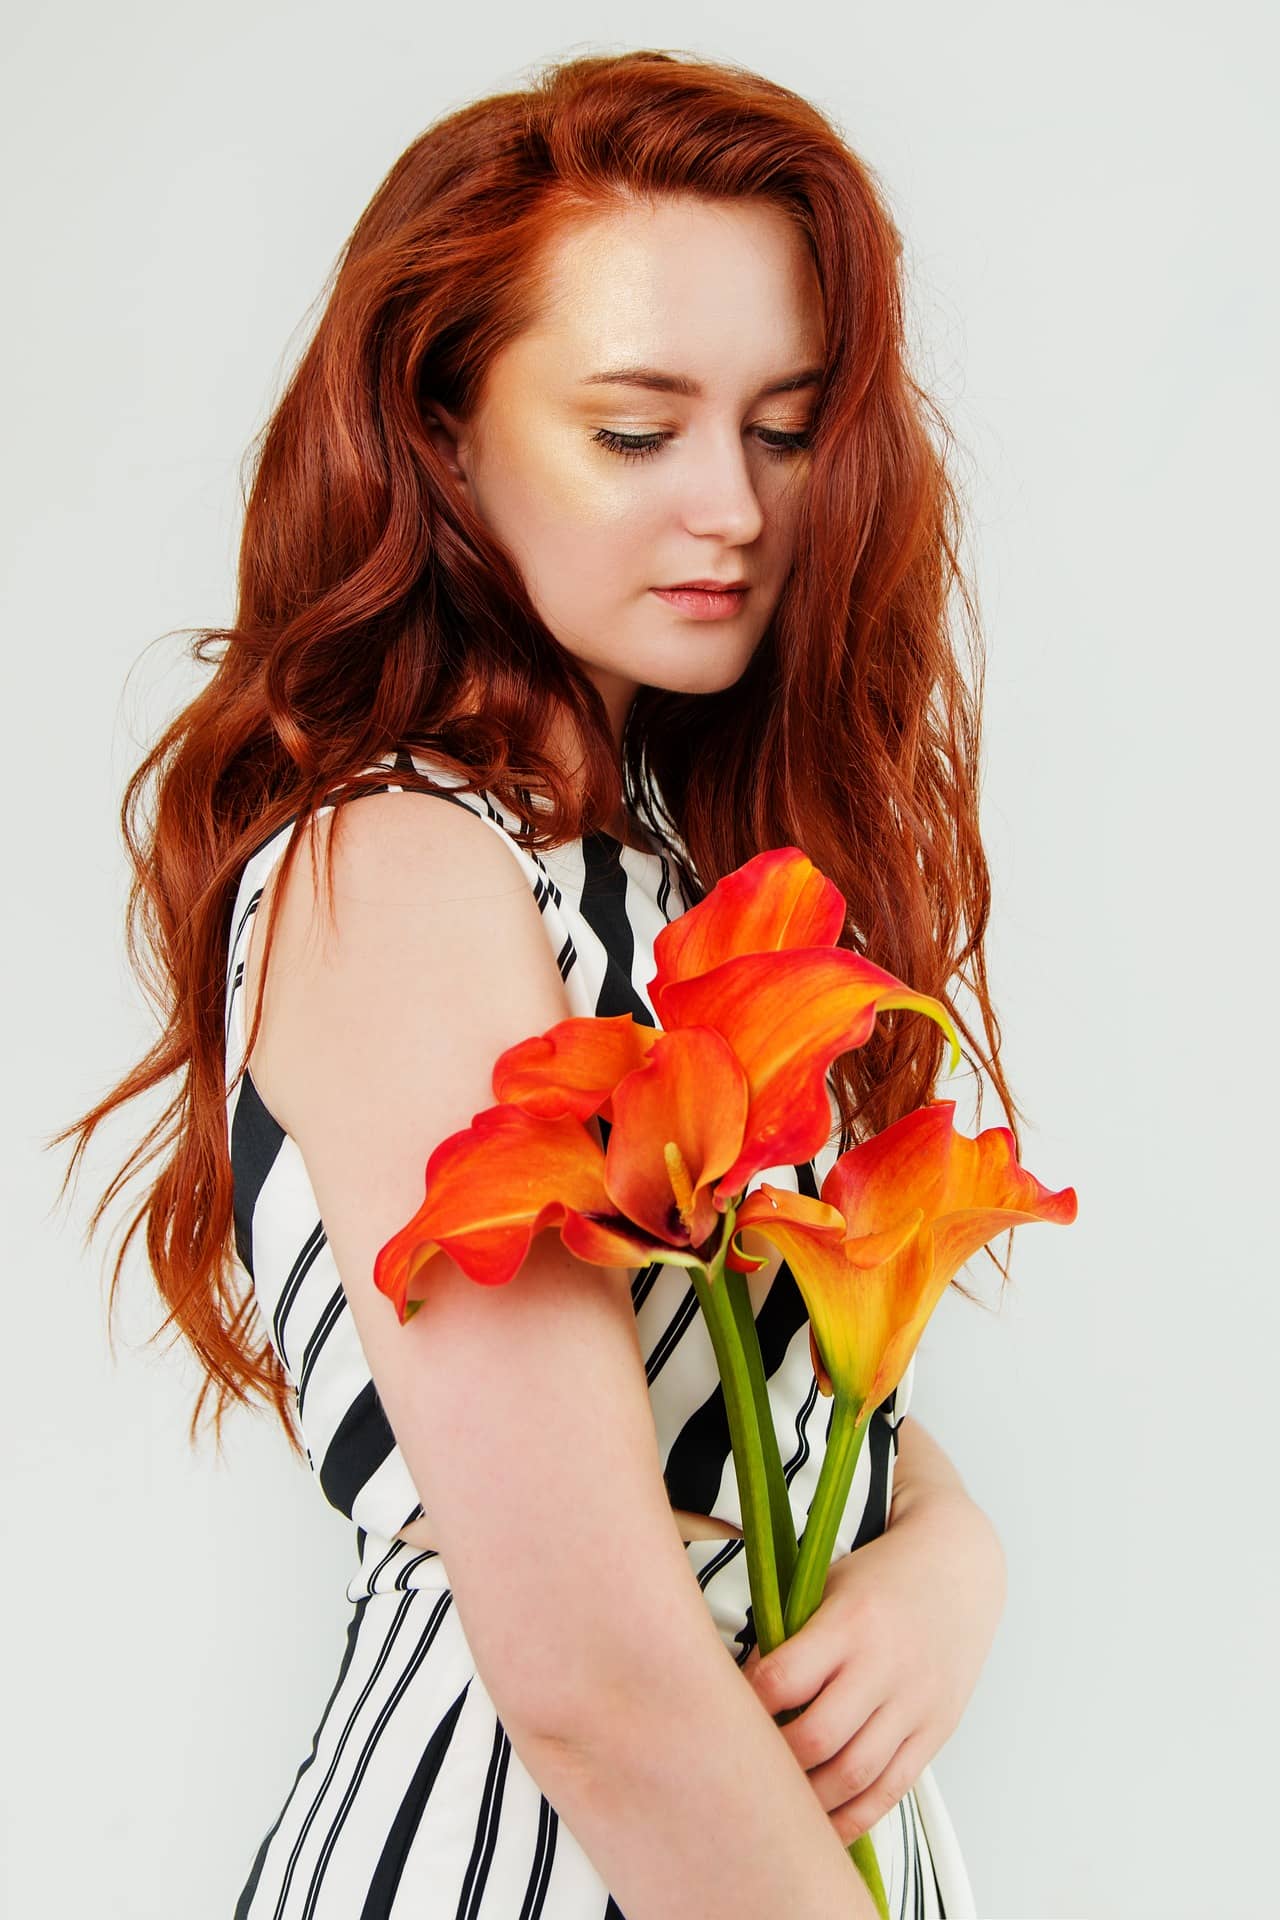 Redhead lady with flowers